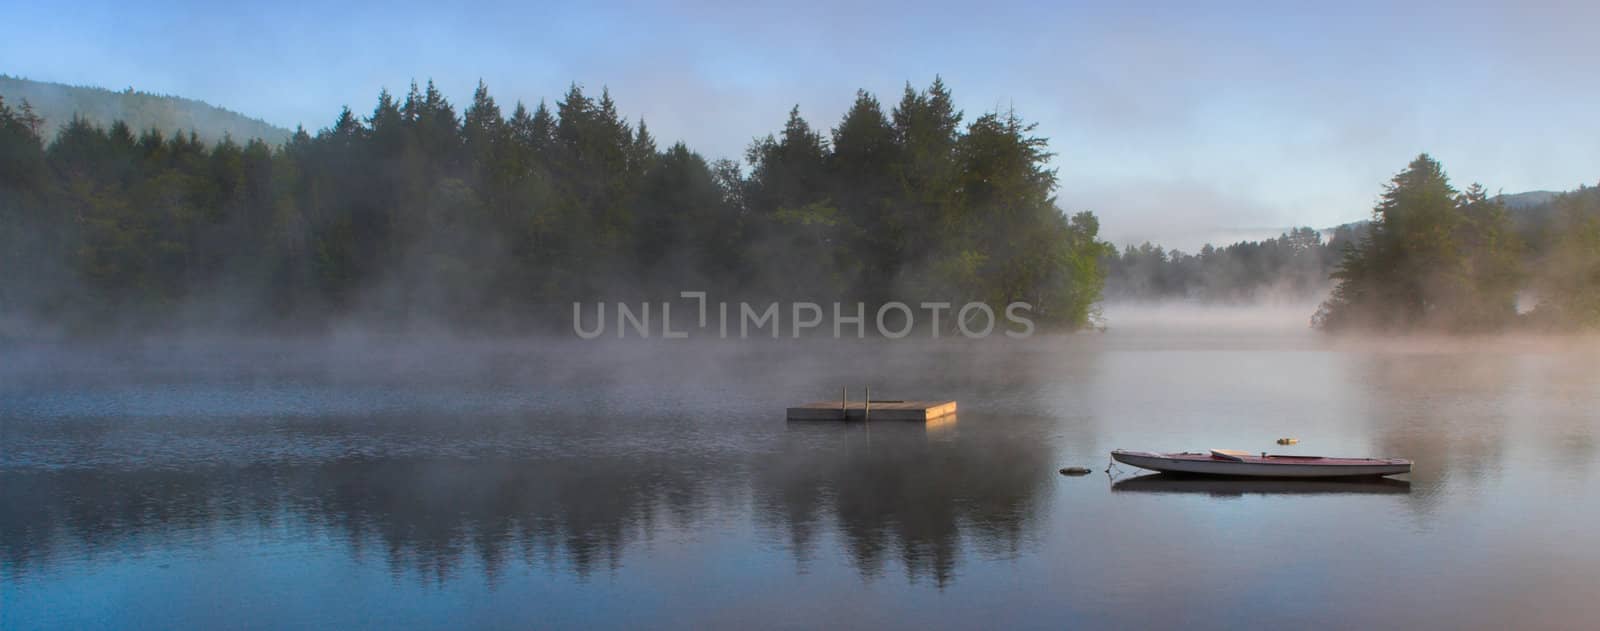 A lake in the early morning with rising fog. Panorama format.